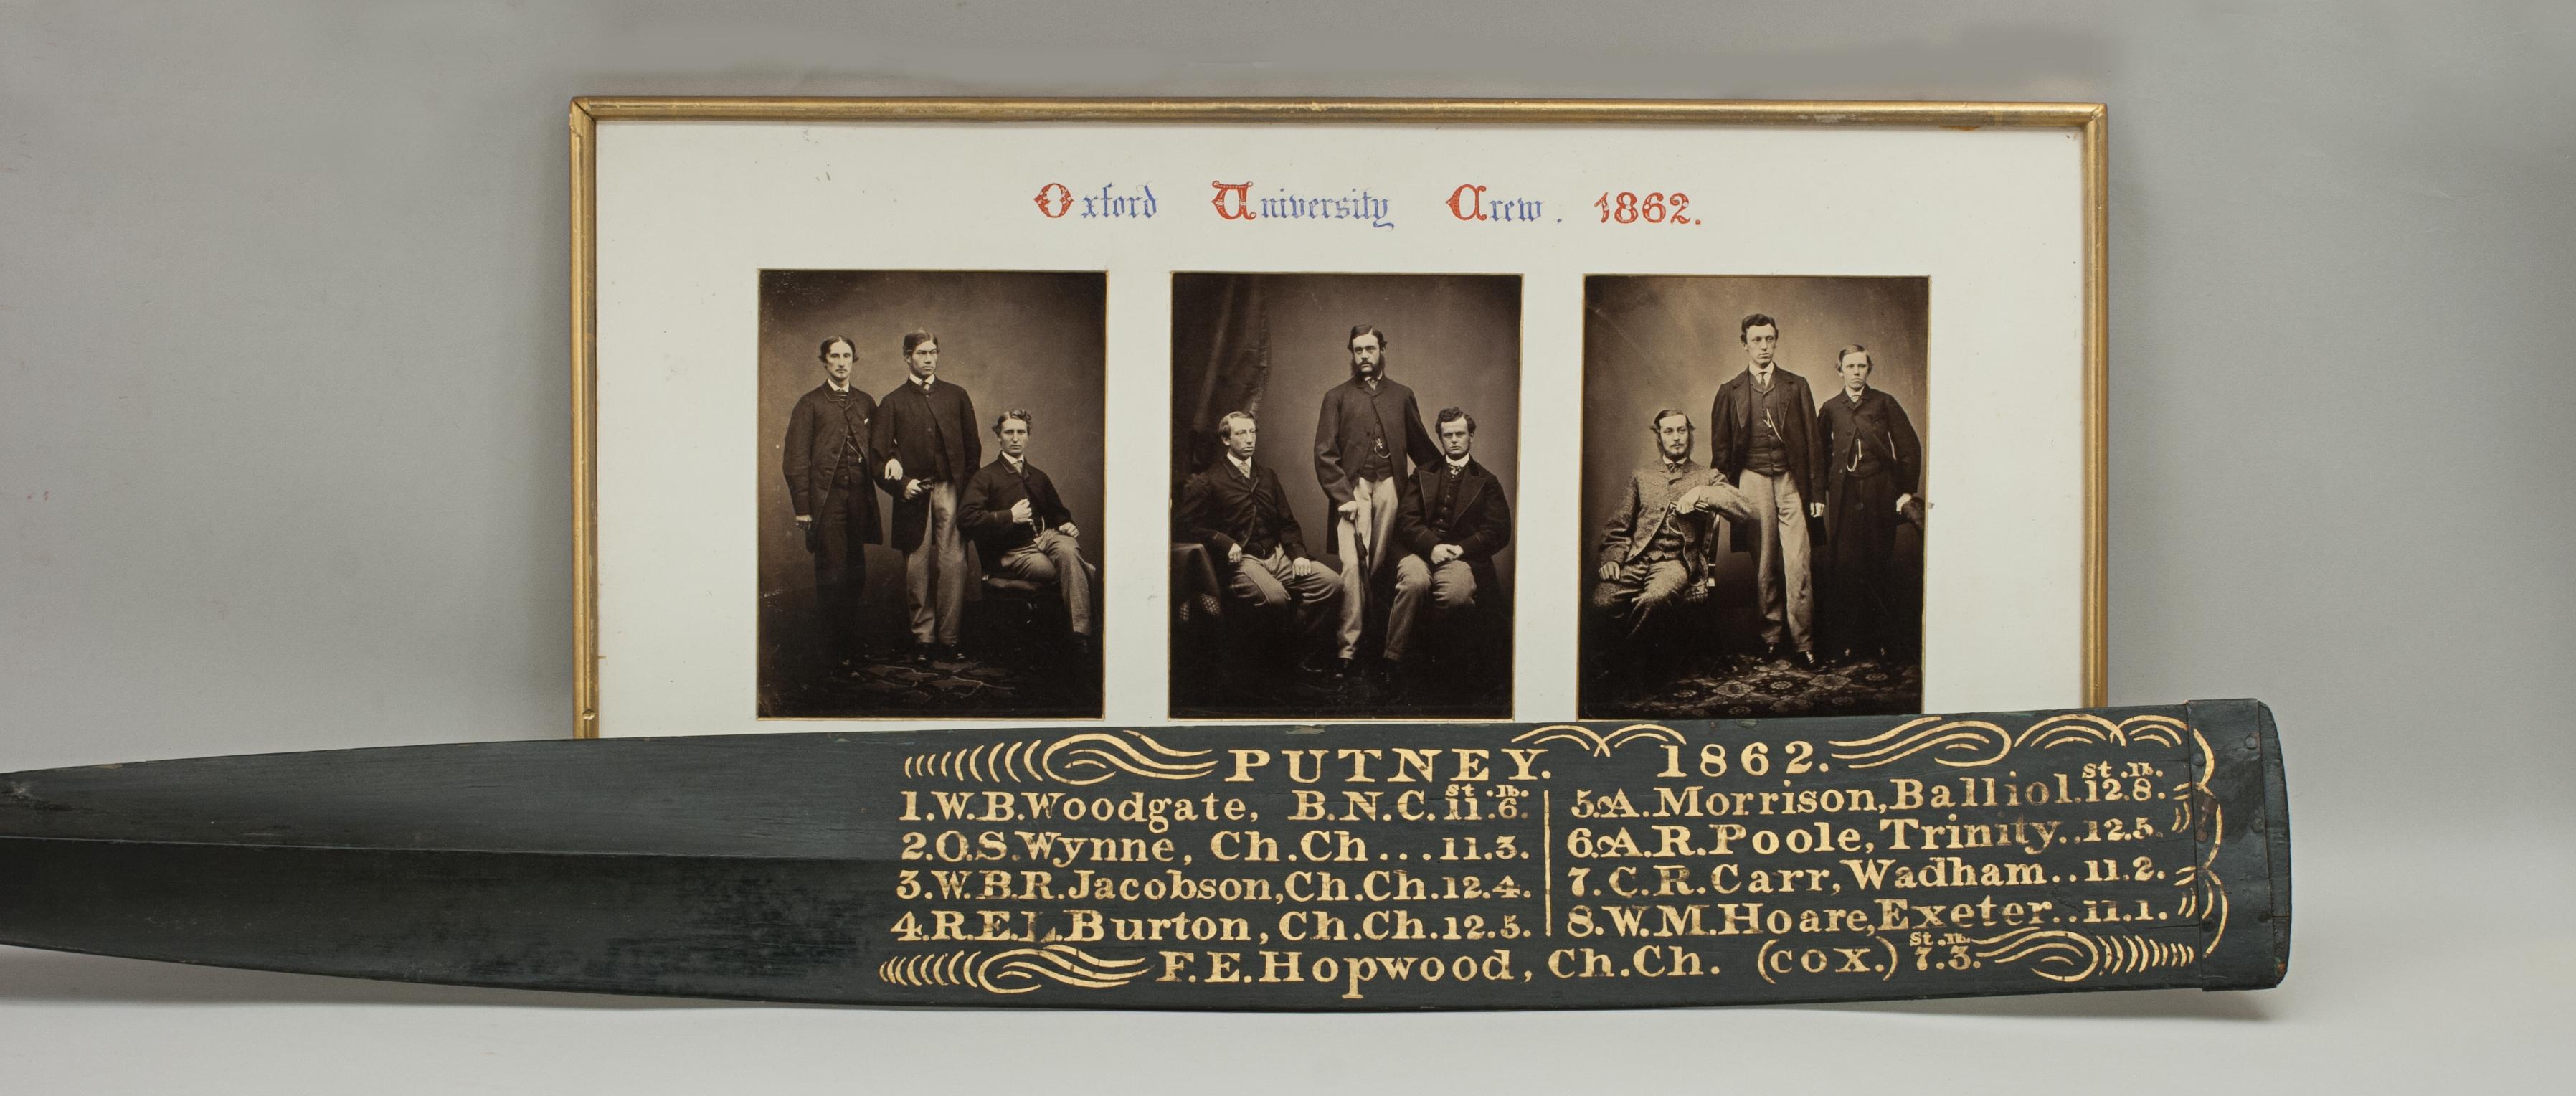 Oxford University Boat Race Rowing Oar 1862, with Photographs. Oxford Cambridge 2